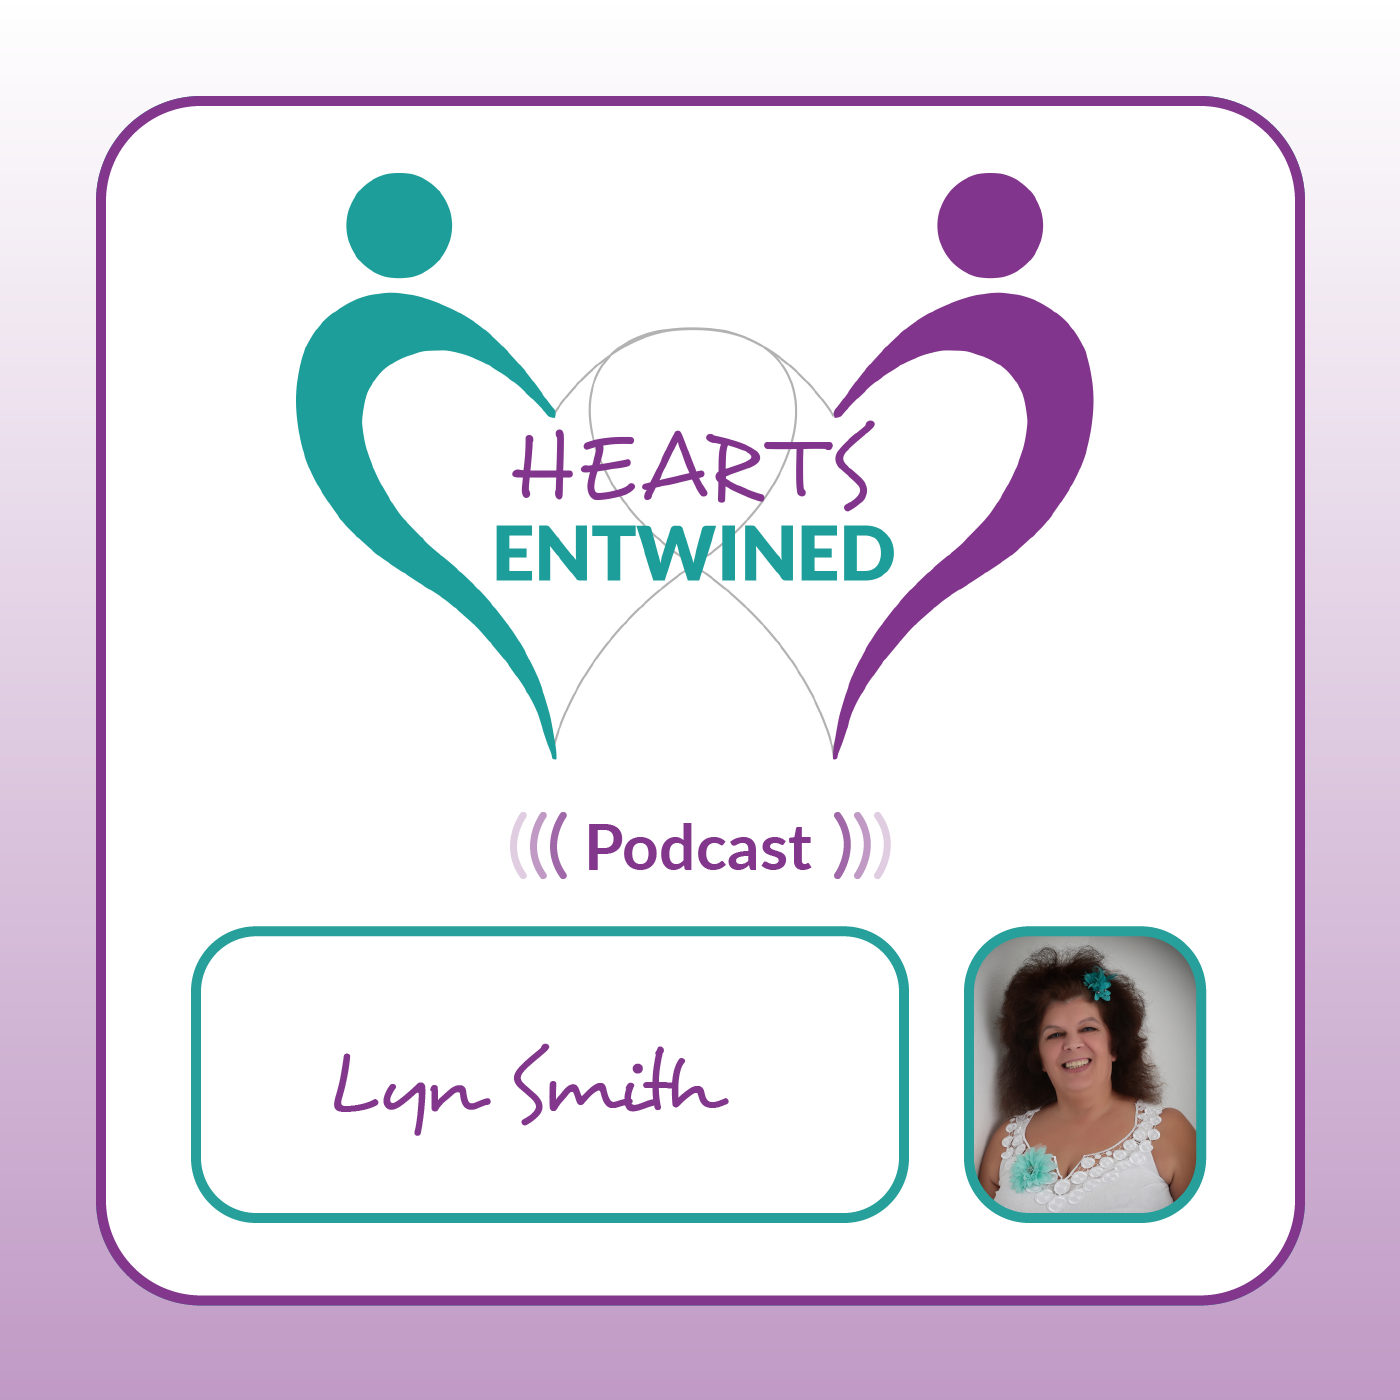 Codependent Relationship Signs - Lyn Smith & Michelle Farris